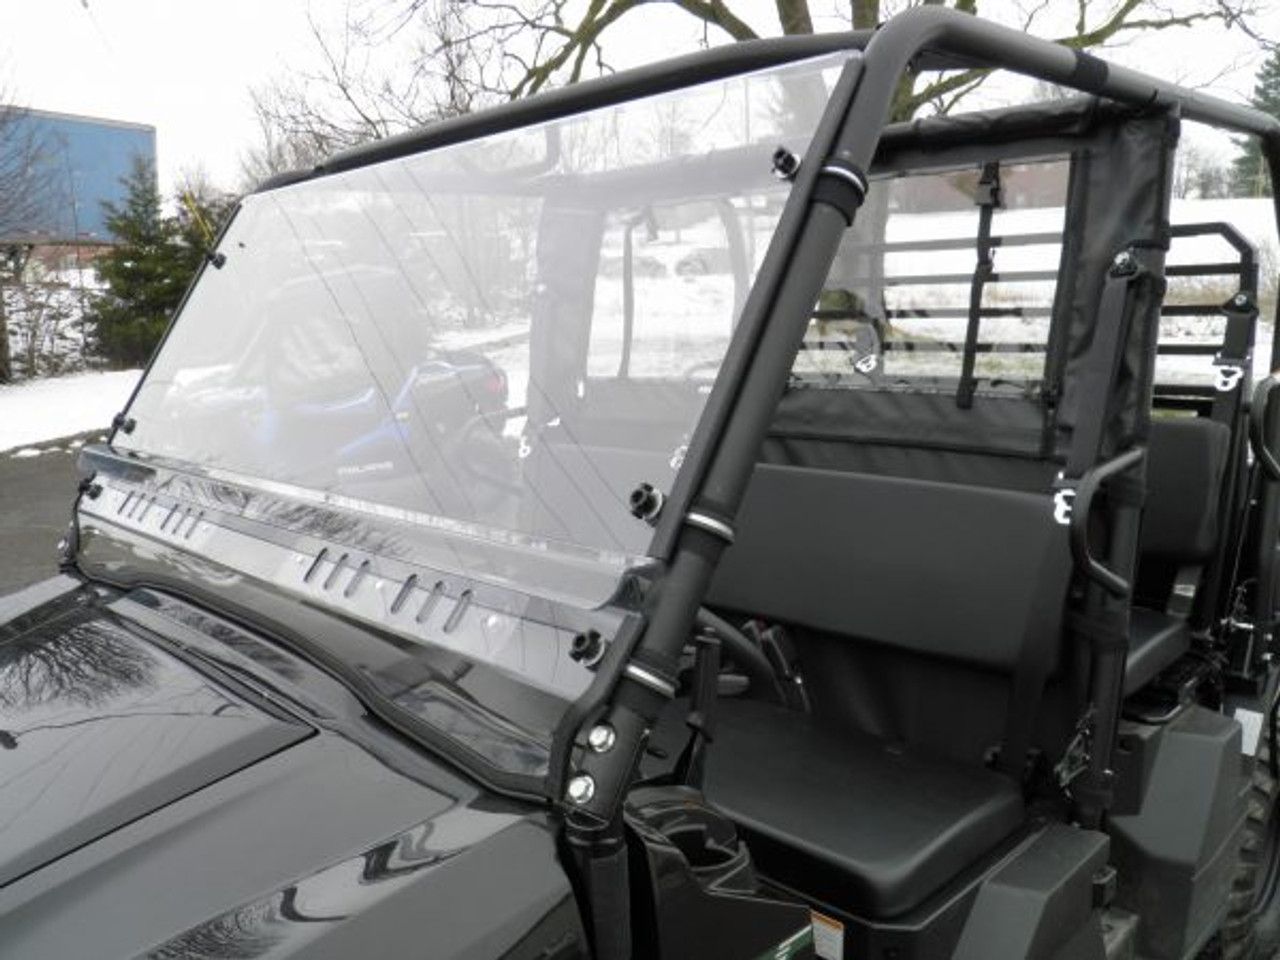 3 Star Kawasaki Mule Pro FX/DX two piece polycarbonate windshield with optional scratch resistance